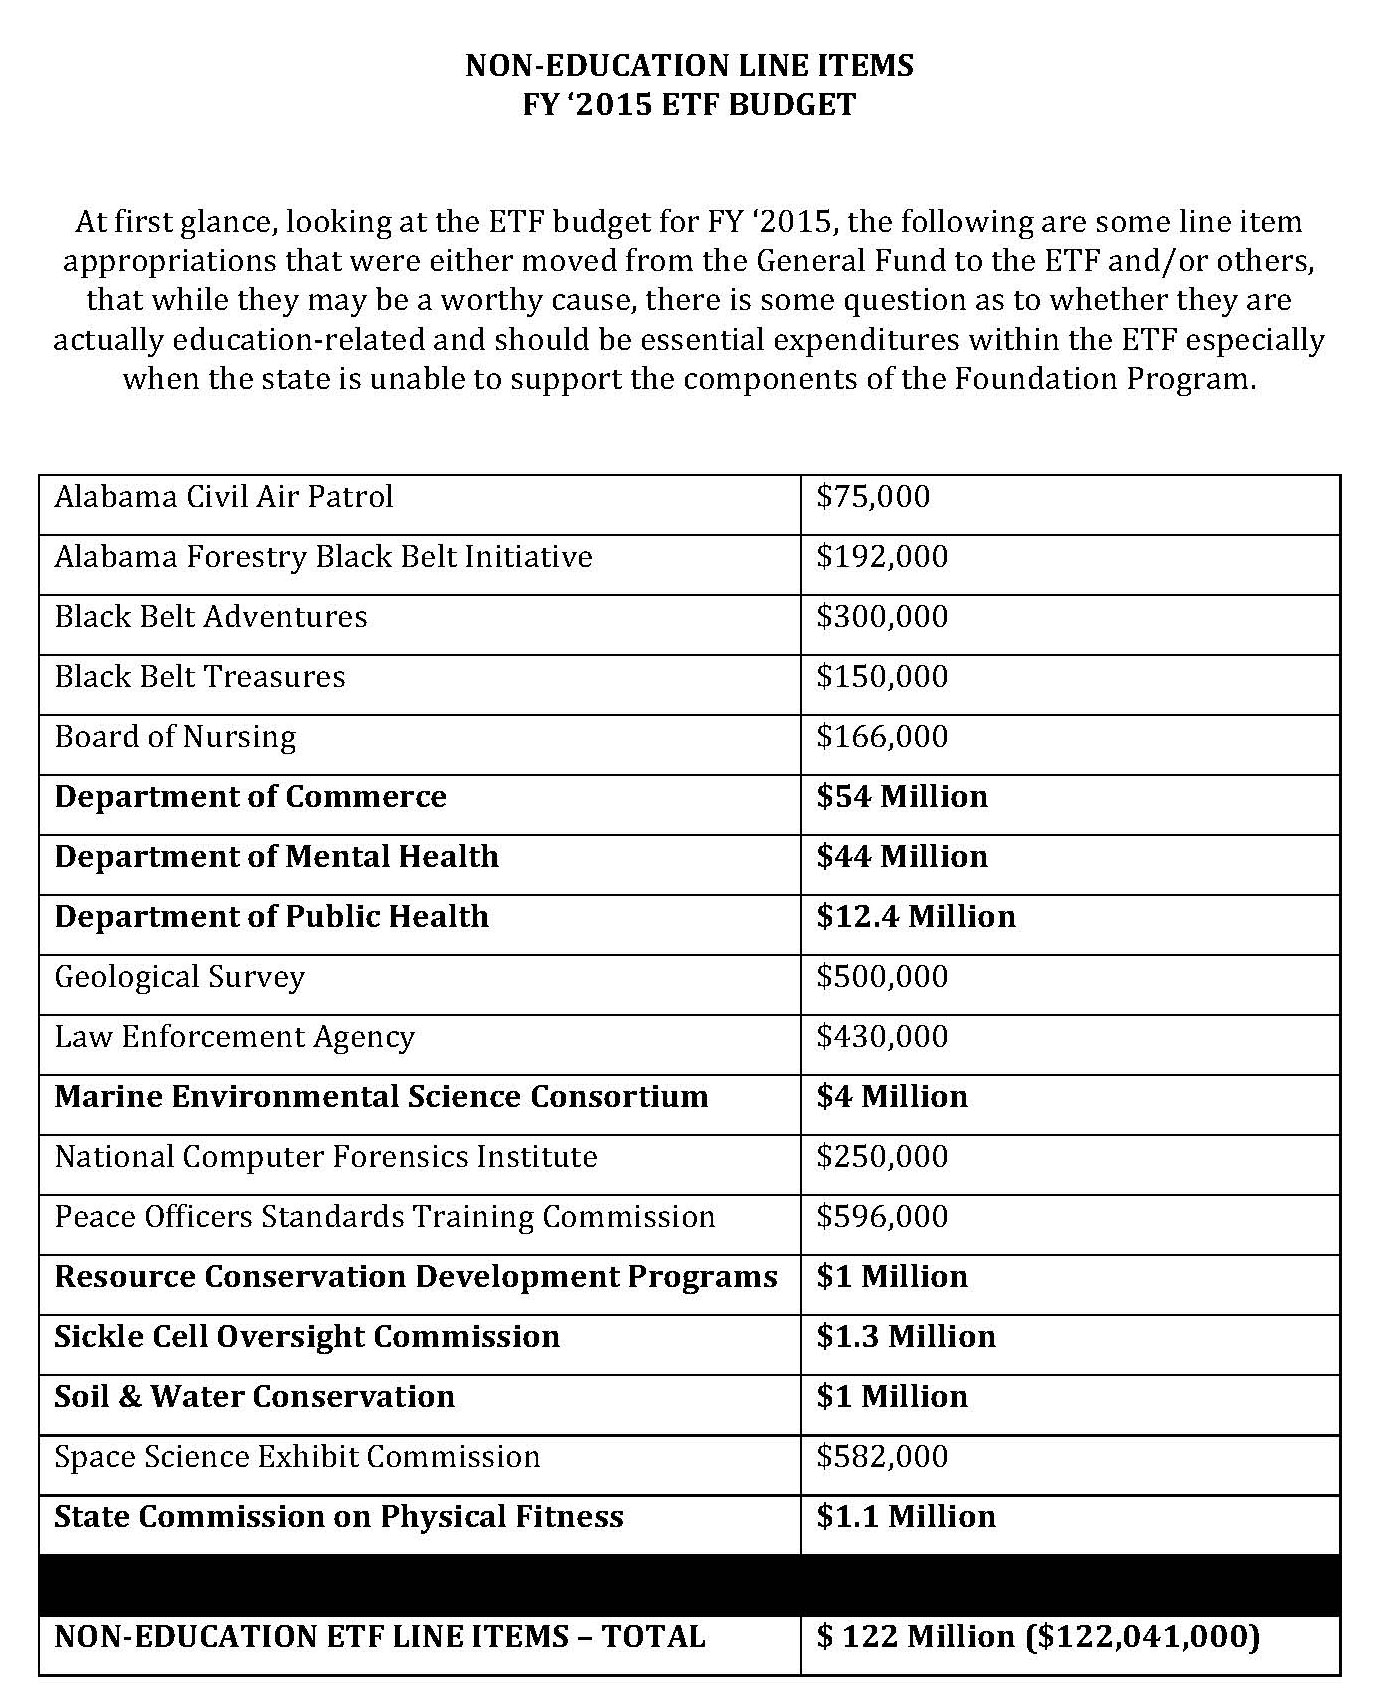 Non Education Items in FY 2015 ETF Budget